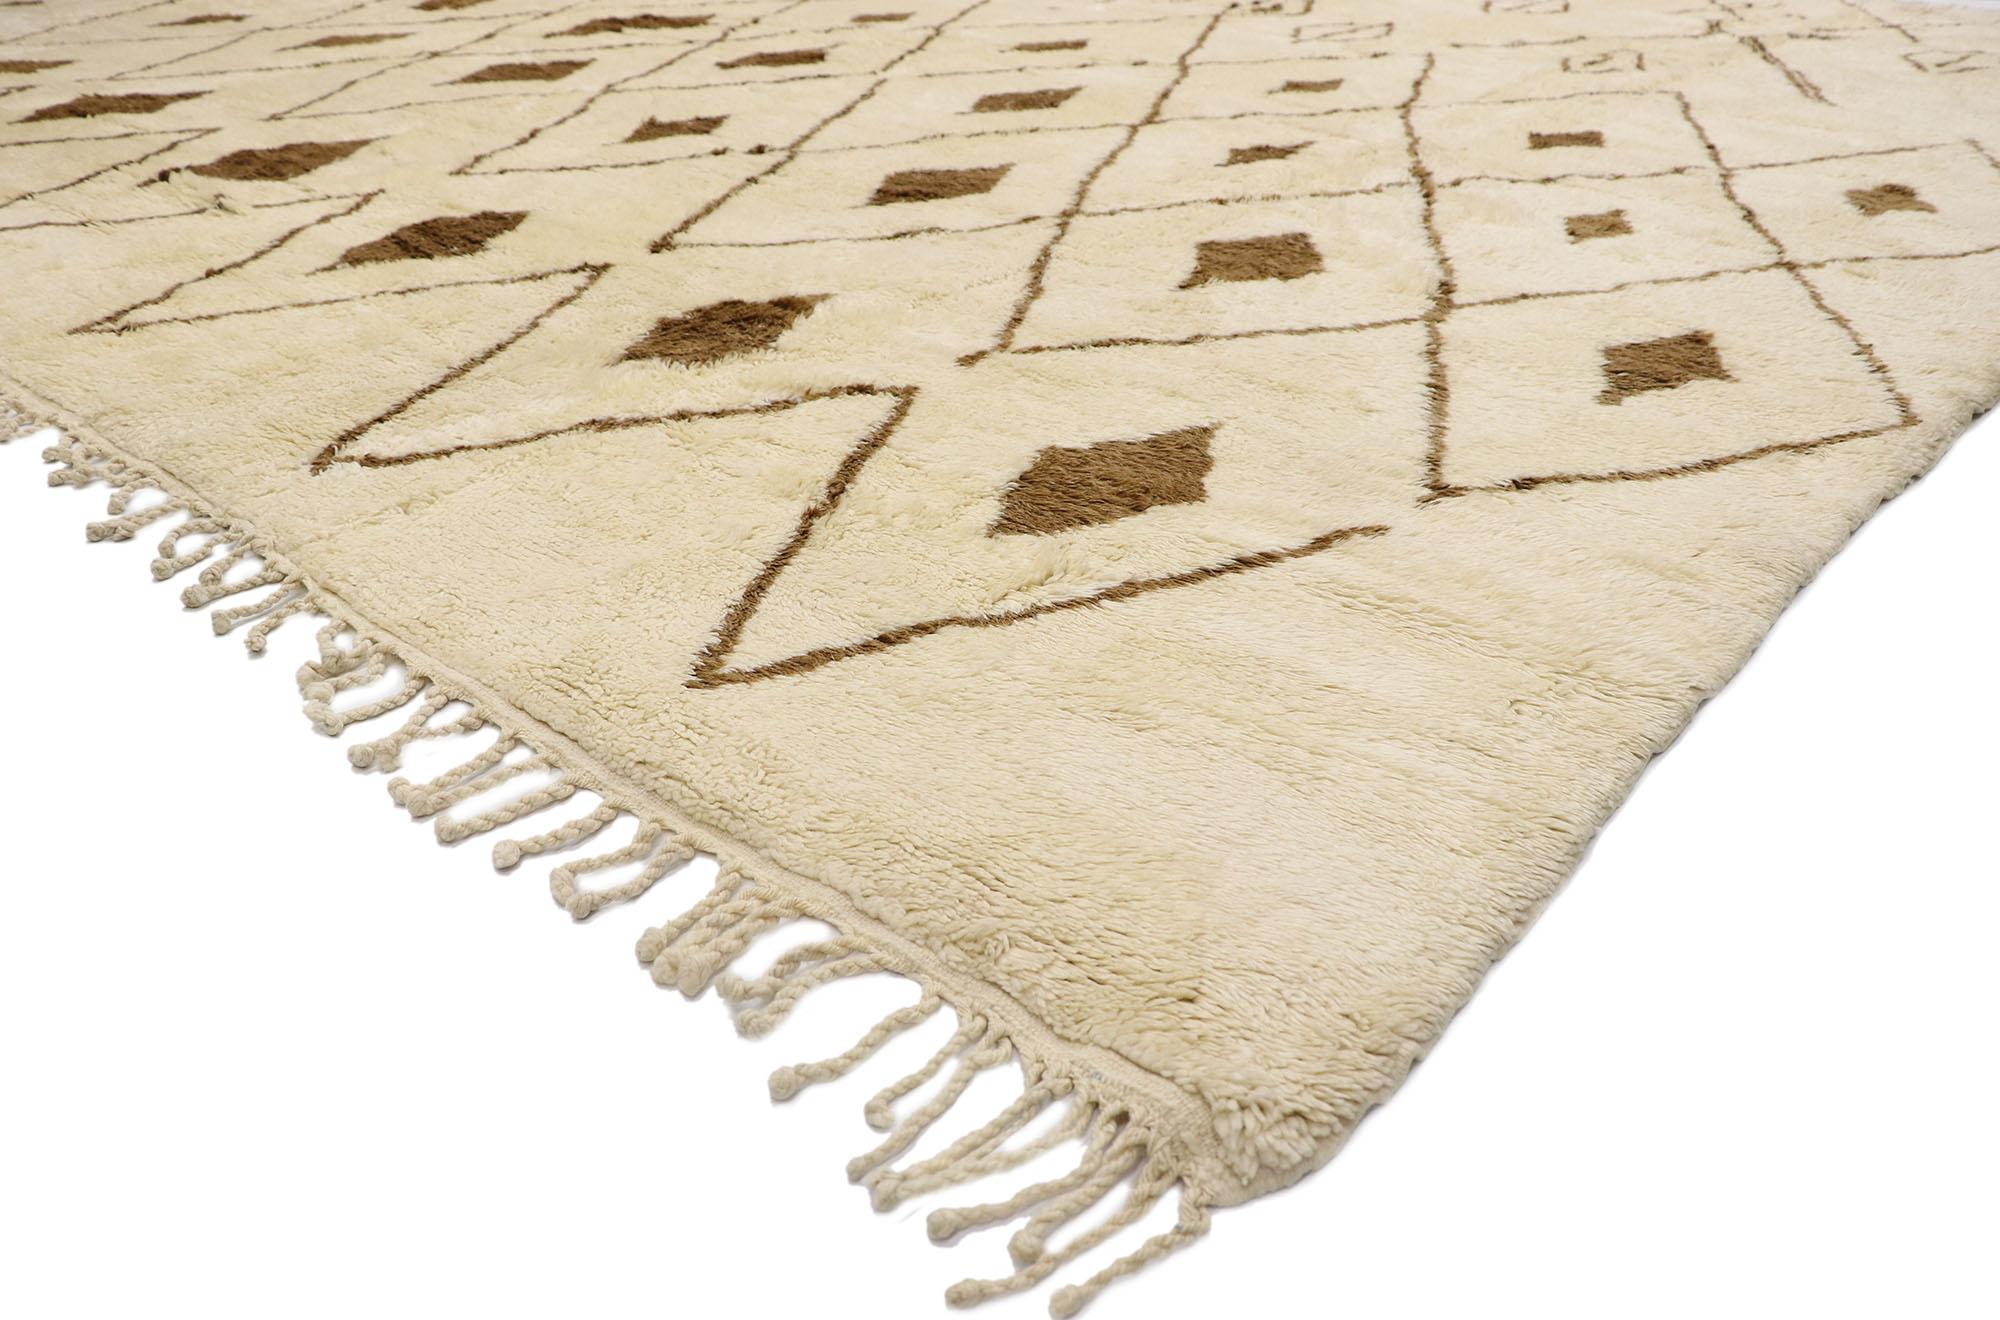 21146 Large Neutral Berber Moroccan Rug, 14'11 x 15'10.
Reflecting elements of Wabi-Sabi with incredible detail and texture, this hand knotted wool Berber Moroccan rug will take on a curated lived-in look that feels timeless while imparting a sense